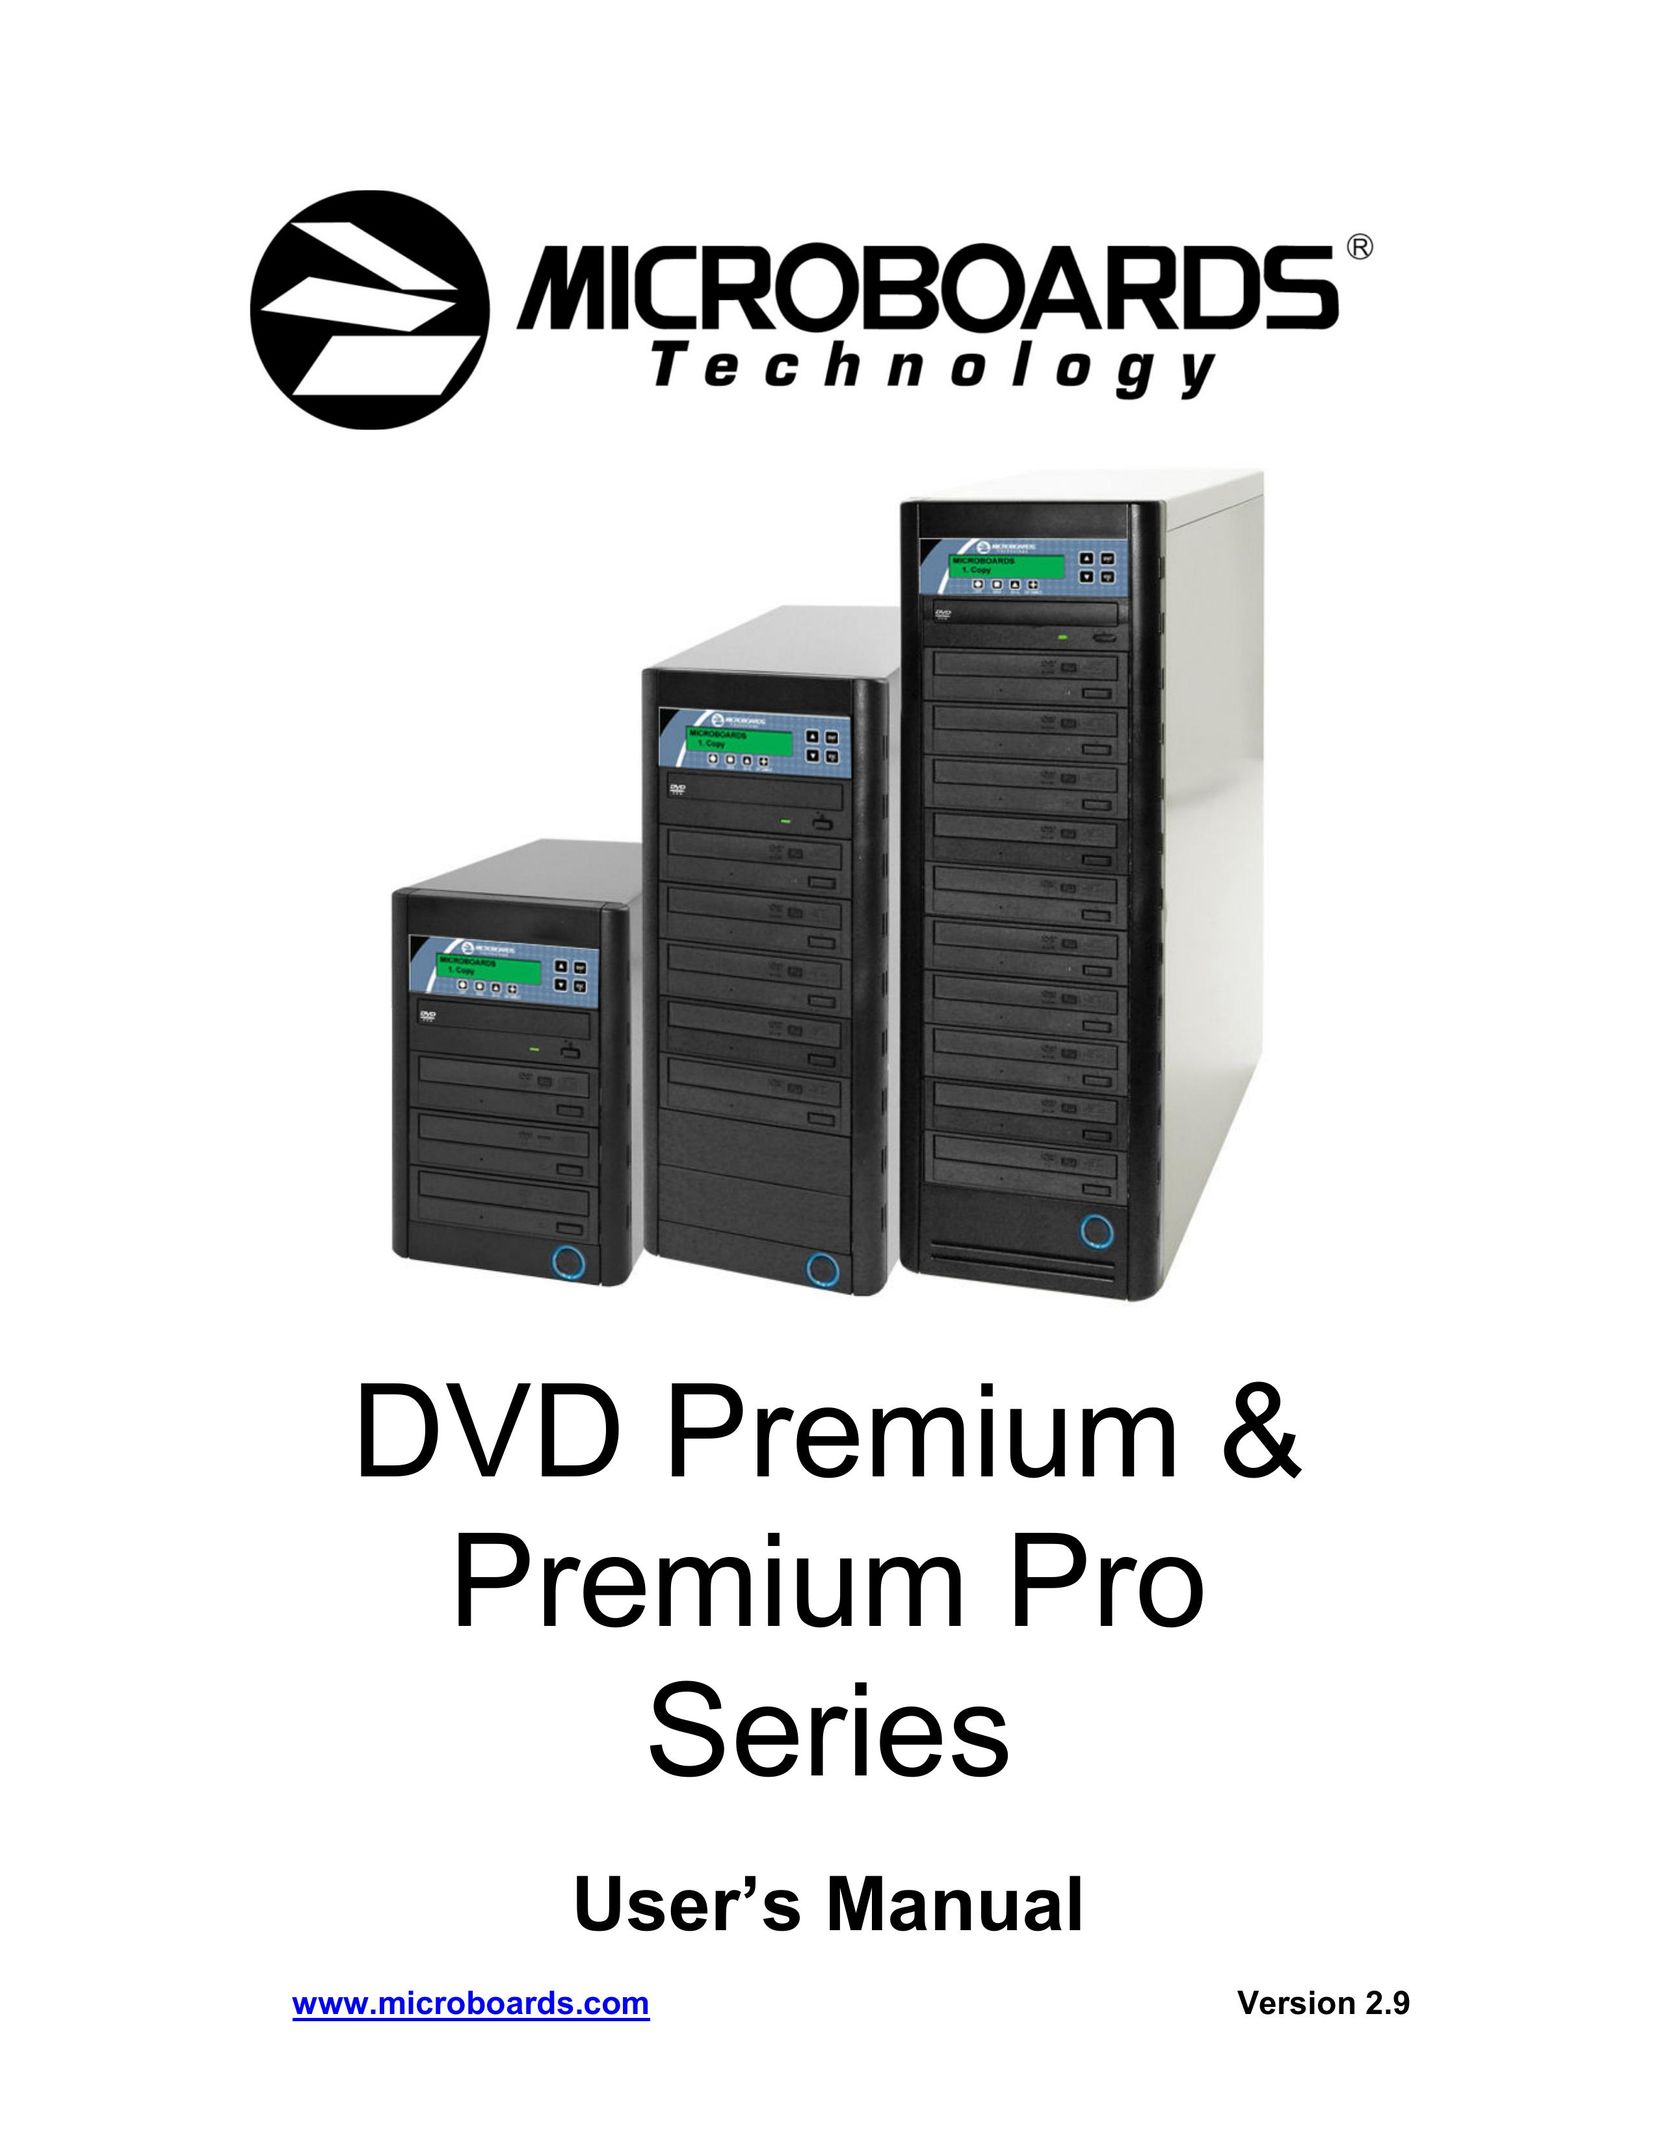 MicroBoards Technology 13577 DVD Recorder User Manual